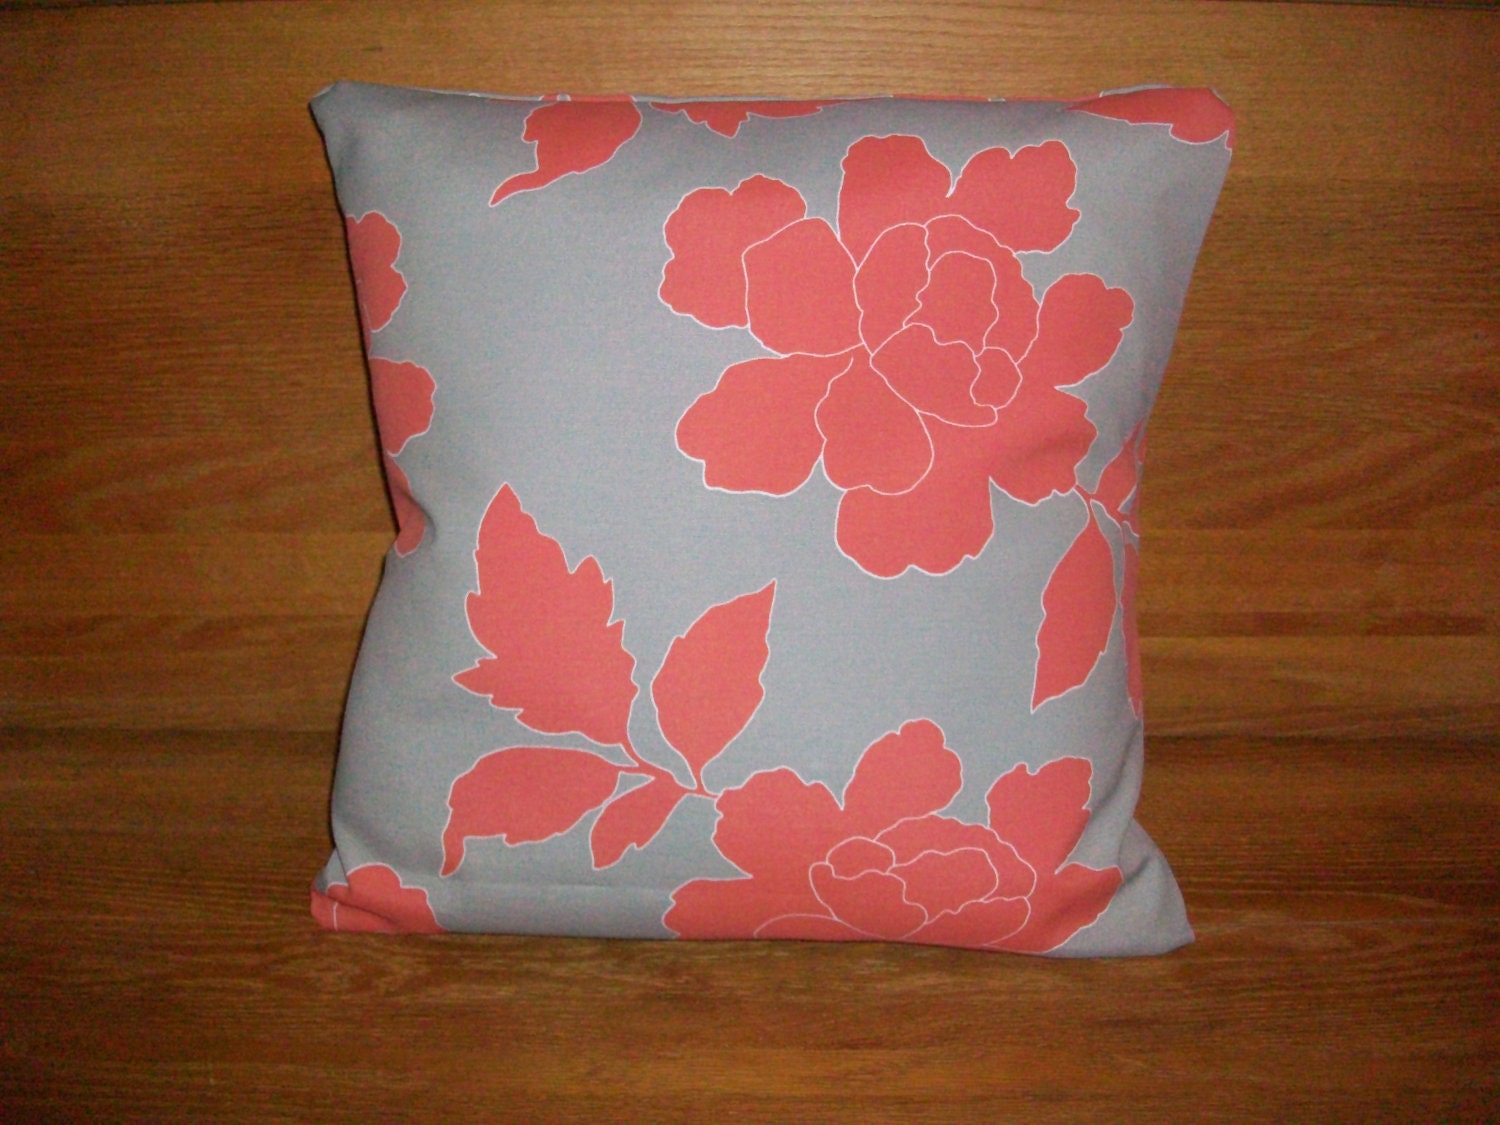 Coral and gray pillow cover- Dwell Studio Indoor/Outdoor 16x16